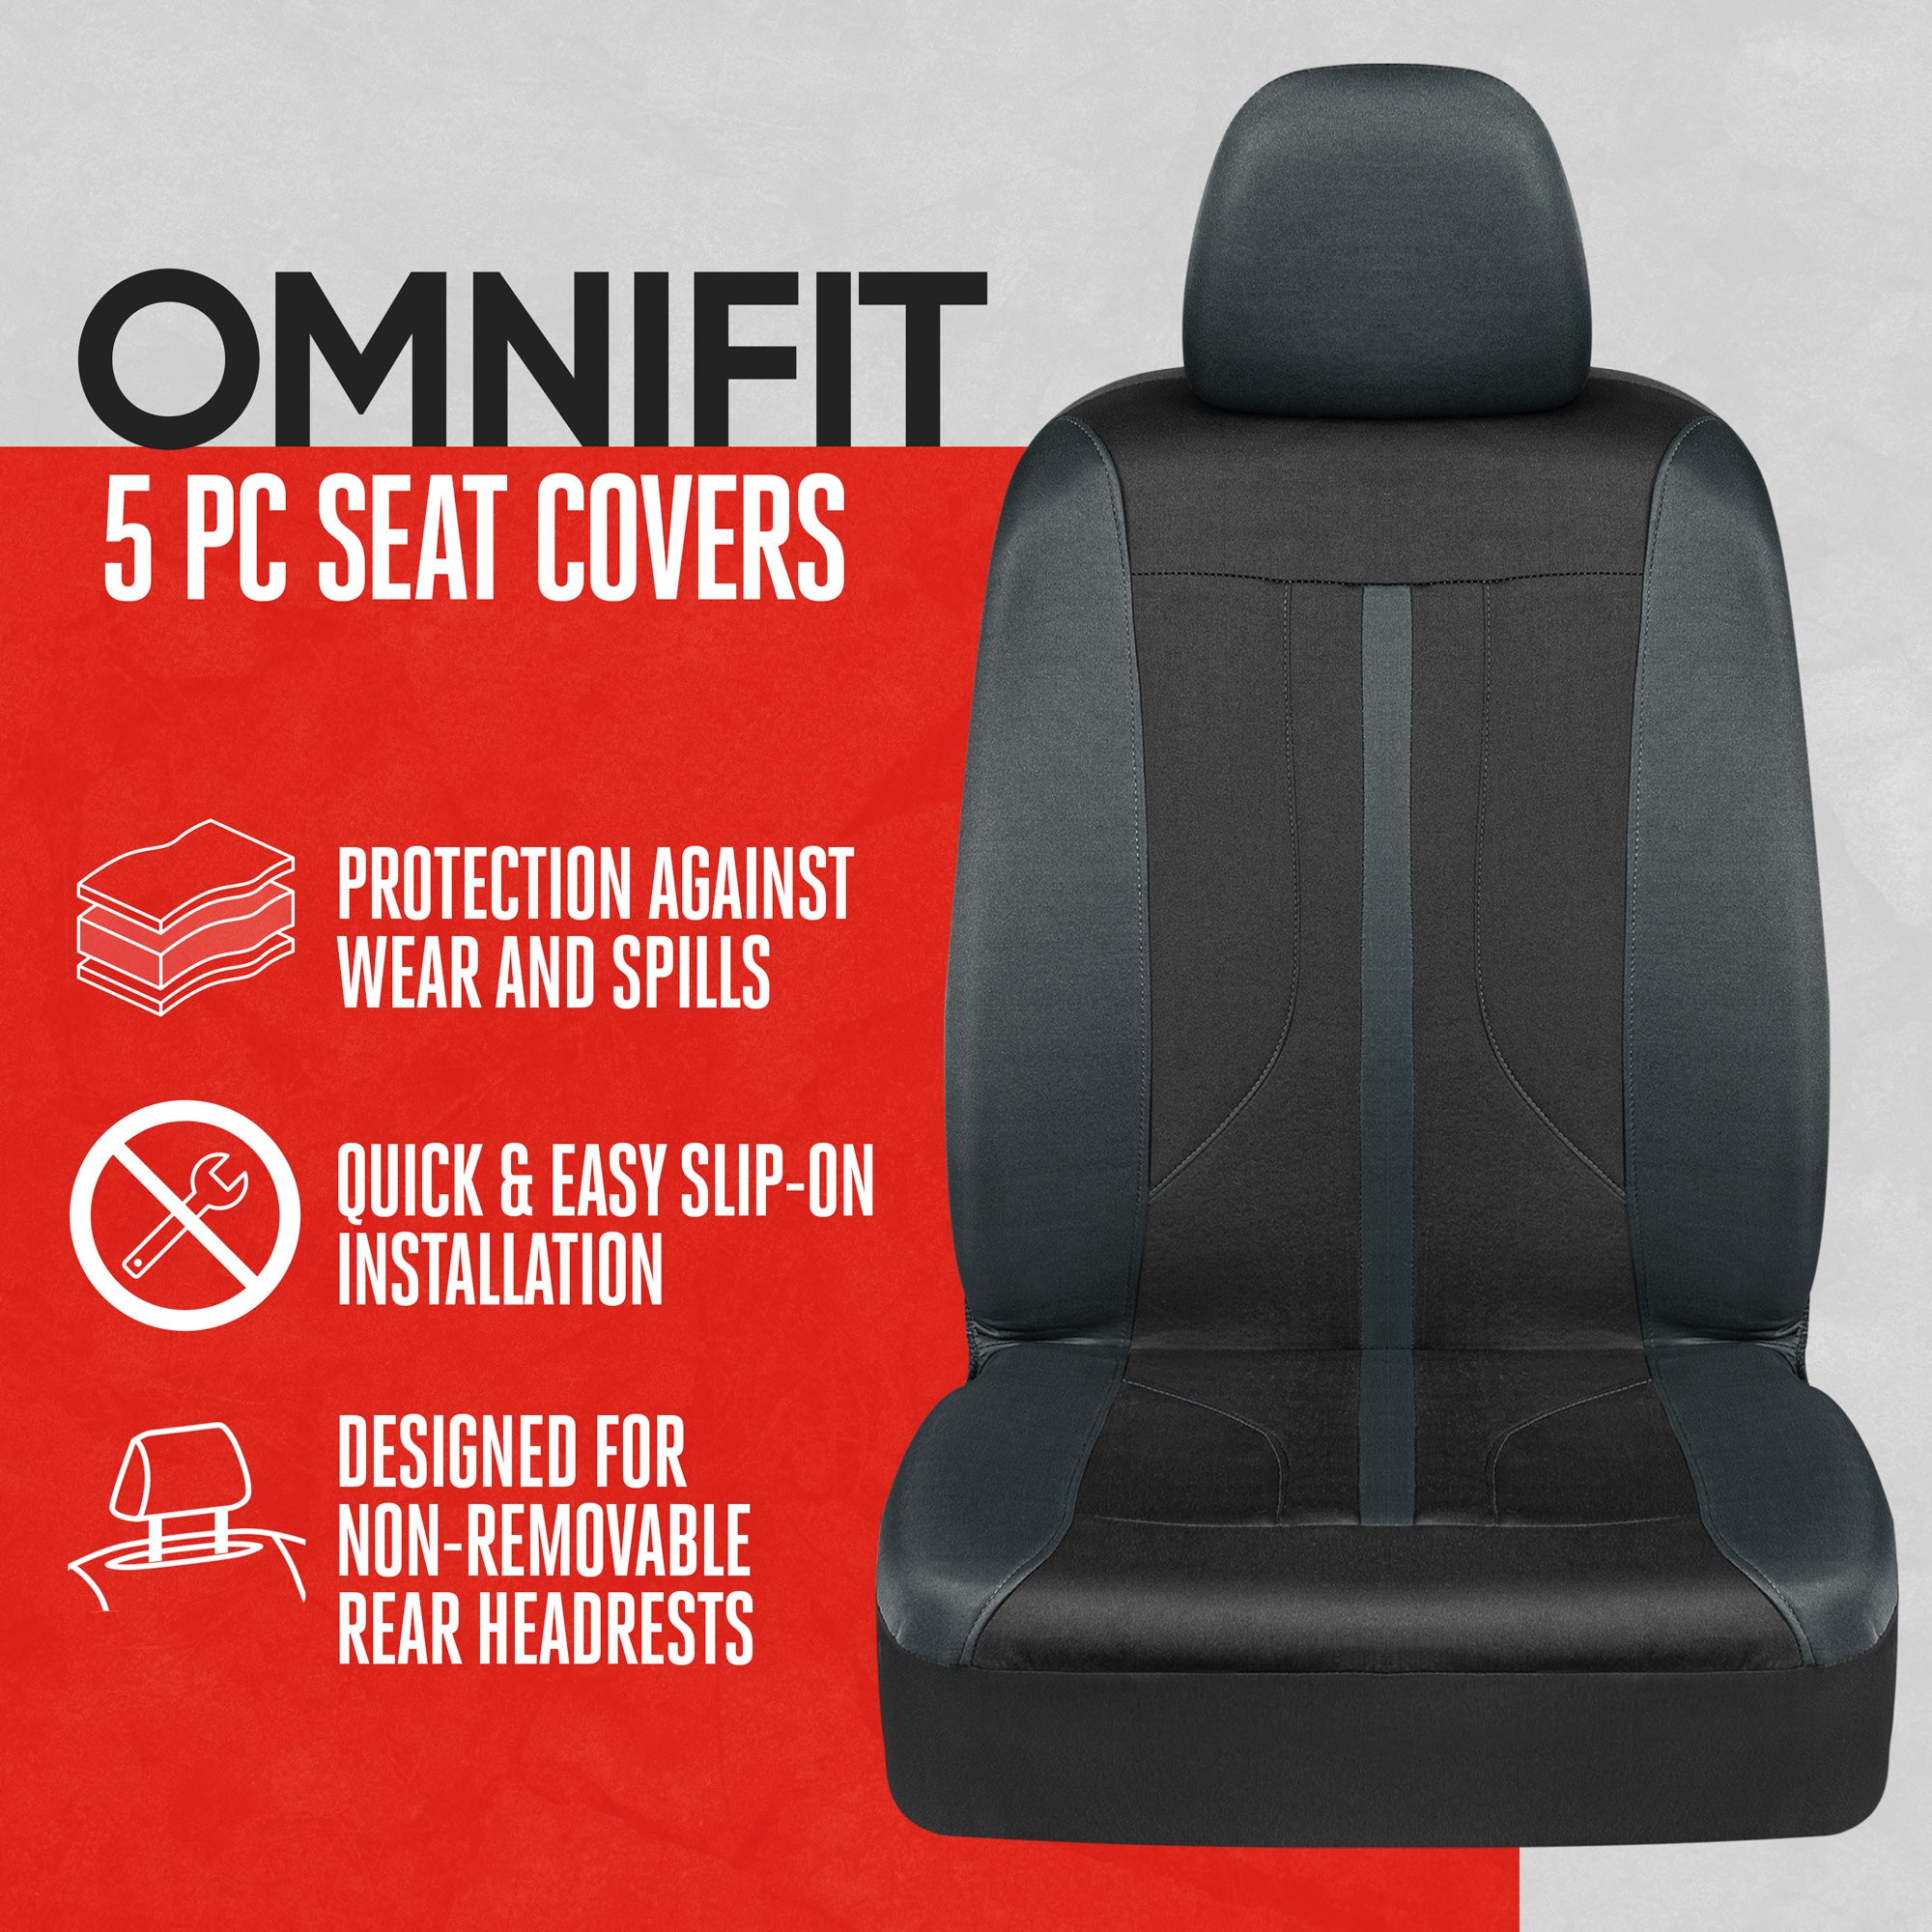 Motor Trend OmniFit Seat Covers for Cars, Two-Tone Gray Car Seat Covers Full Set with Hooded Split Bench Seat Cover, Interior Car Accessories, Automotive Seat Covers